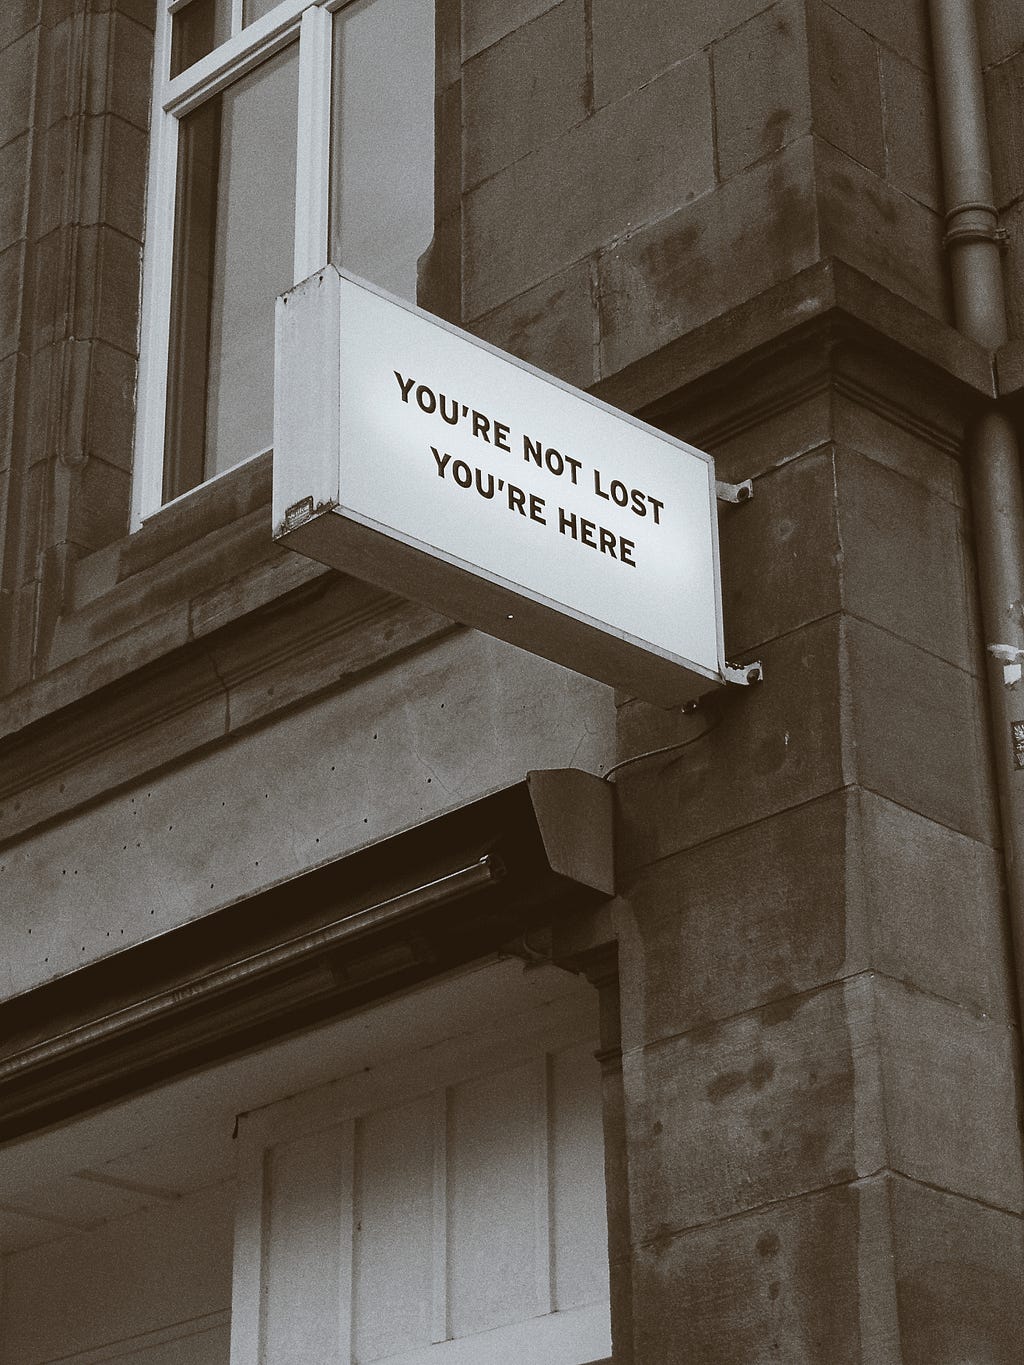 A sign board displaying the words “you’re not lost, you’re here”.